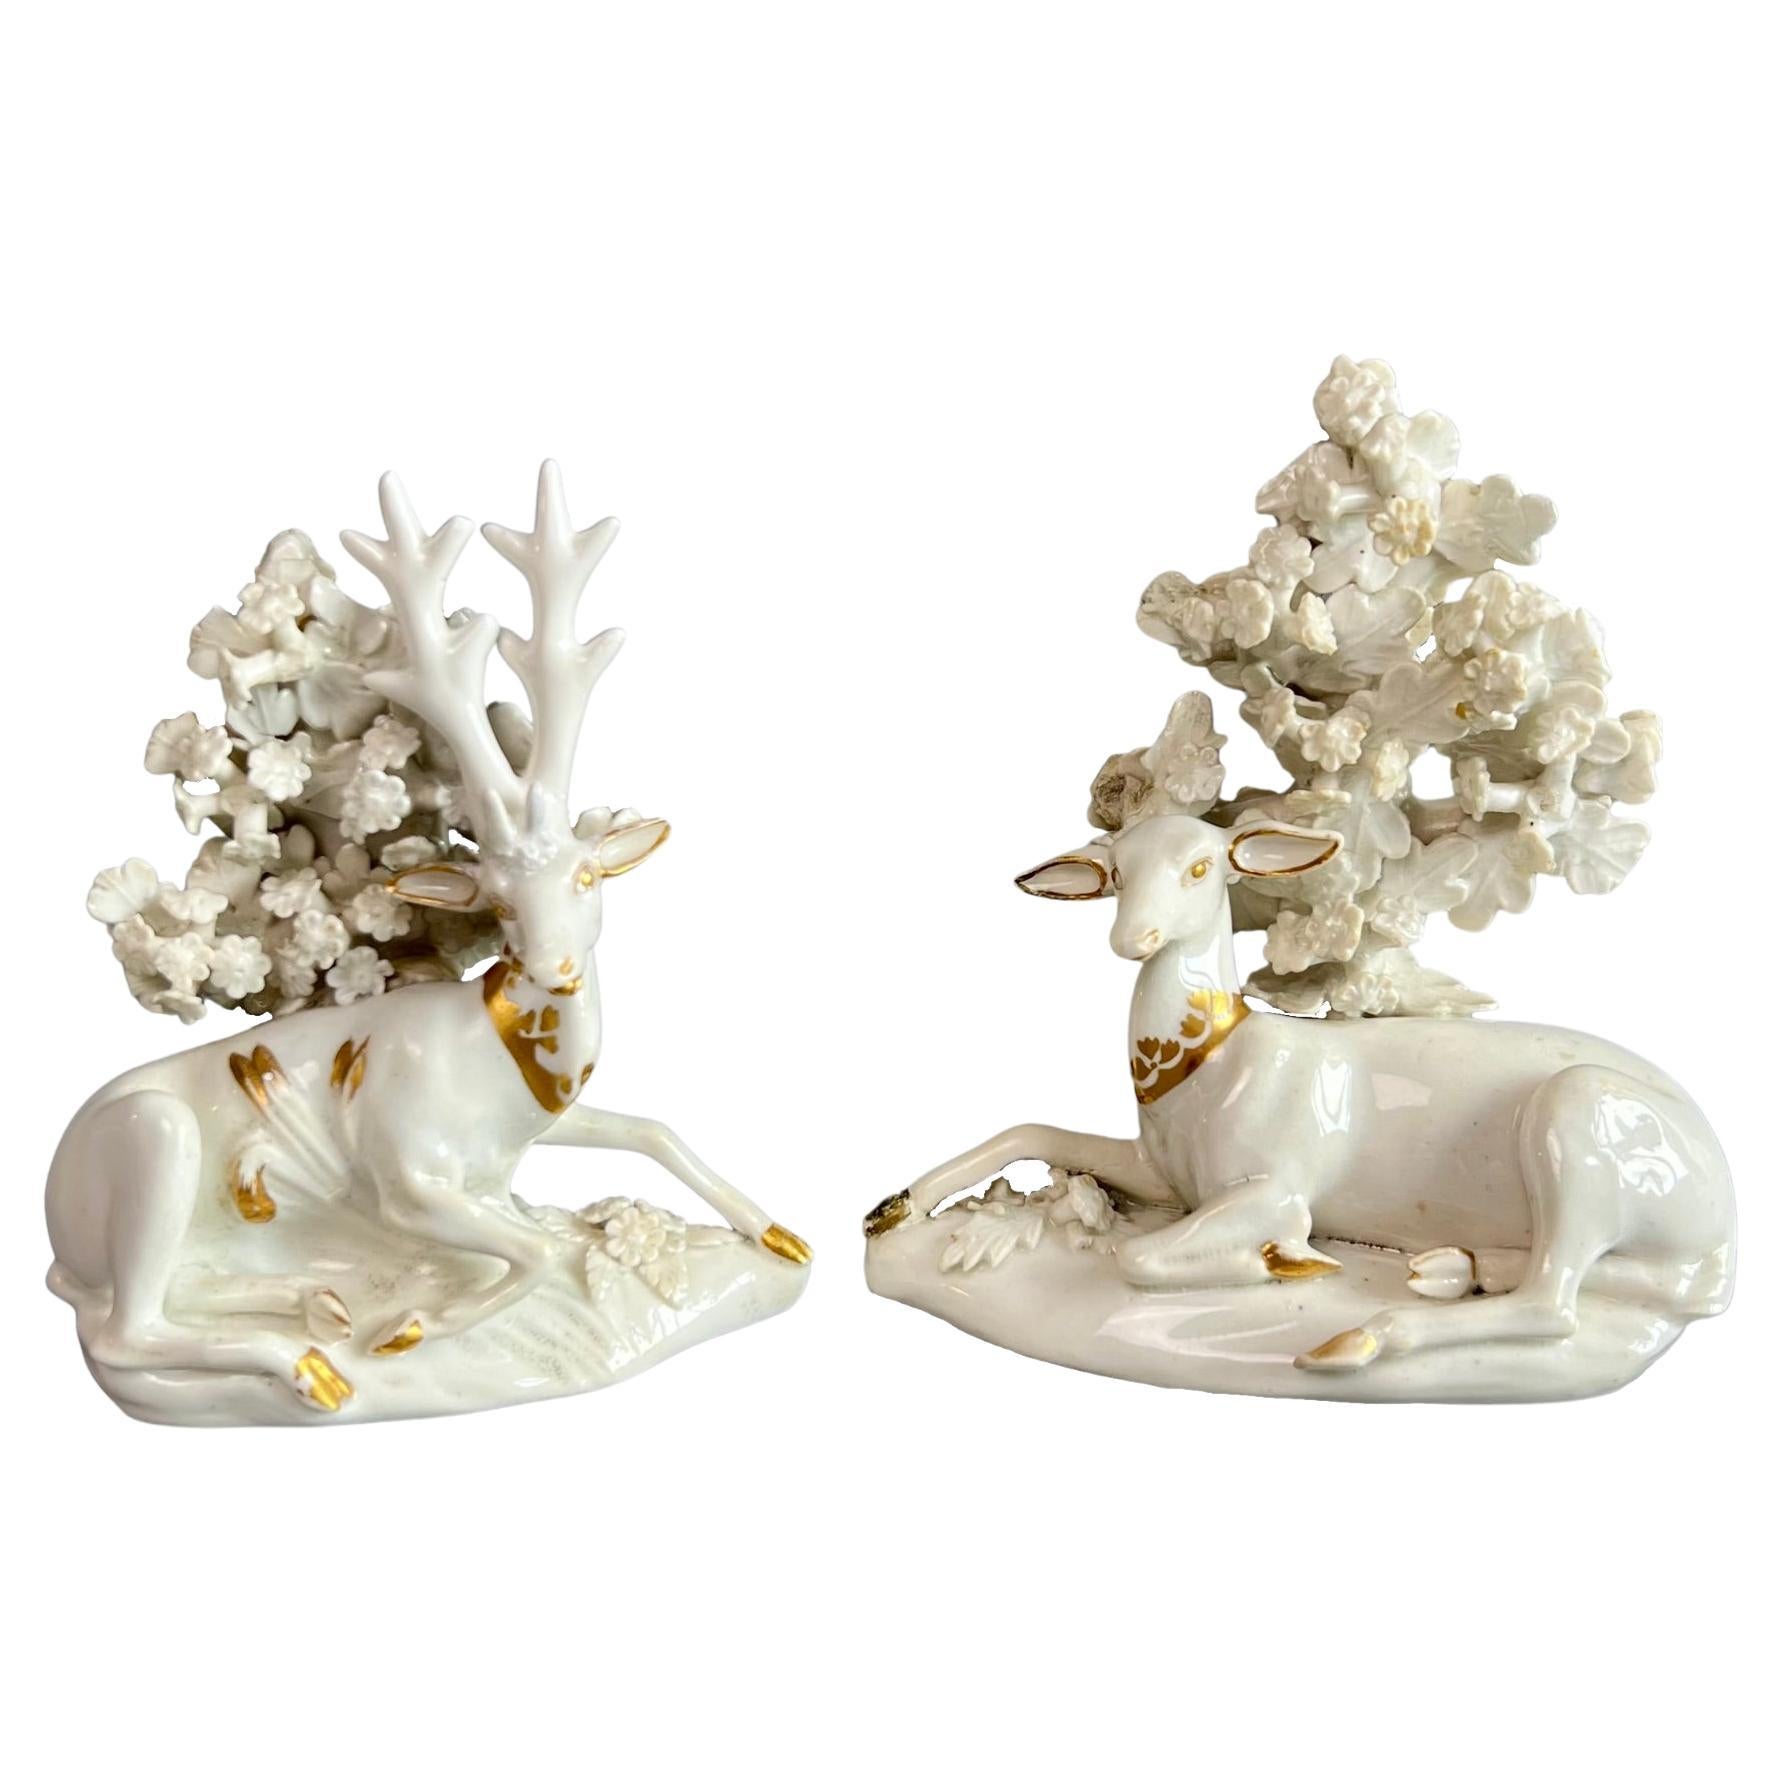 Bloor Derby Pair of Porcelain Figures, Stag and Doe, circa 1765-1820 For Sale